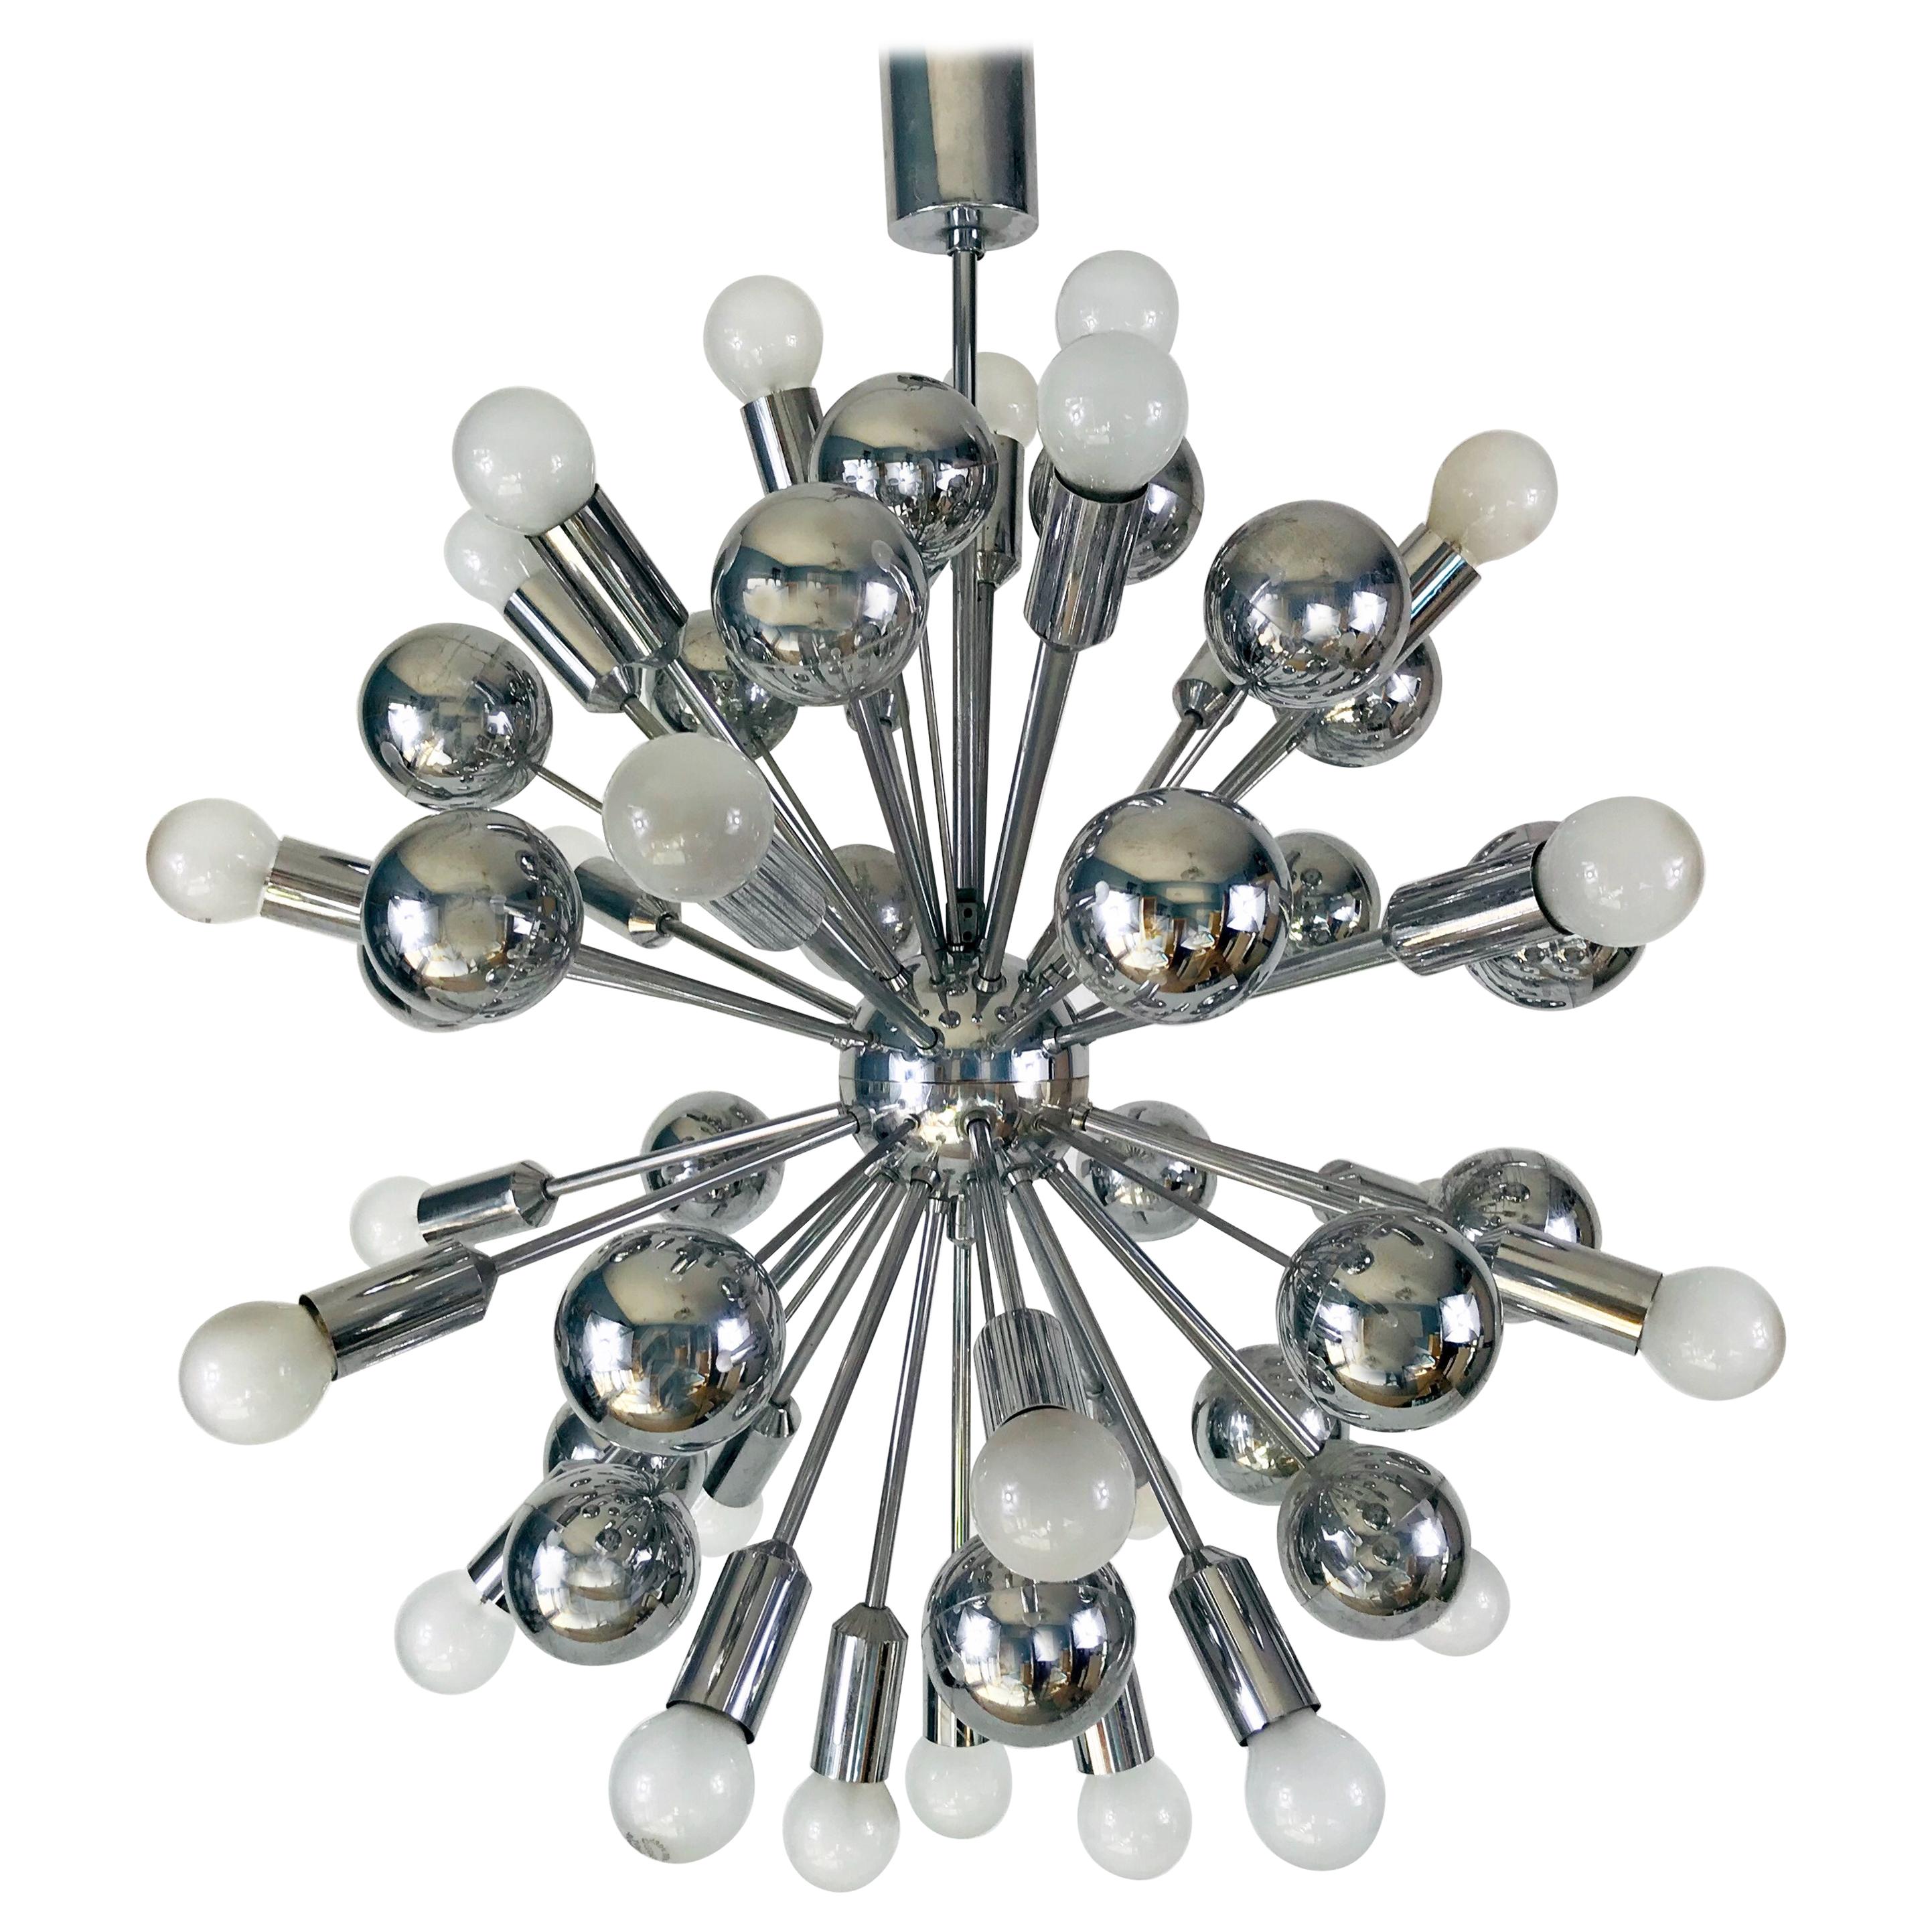 Rare Large Space Age Chrome Chandelier by Cosack Leuchten, 1970s, Germany